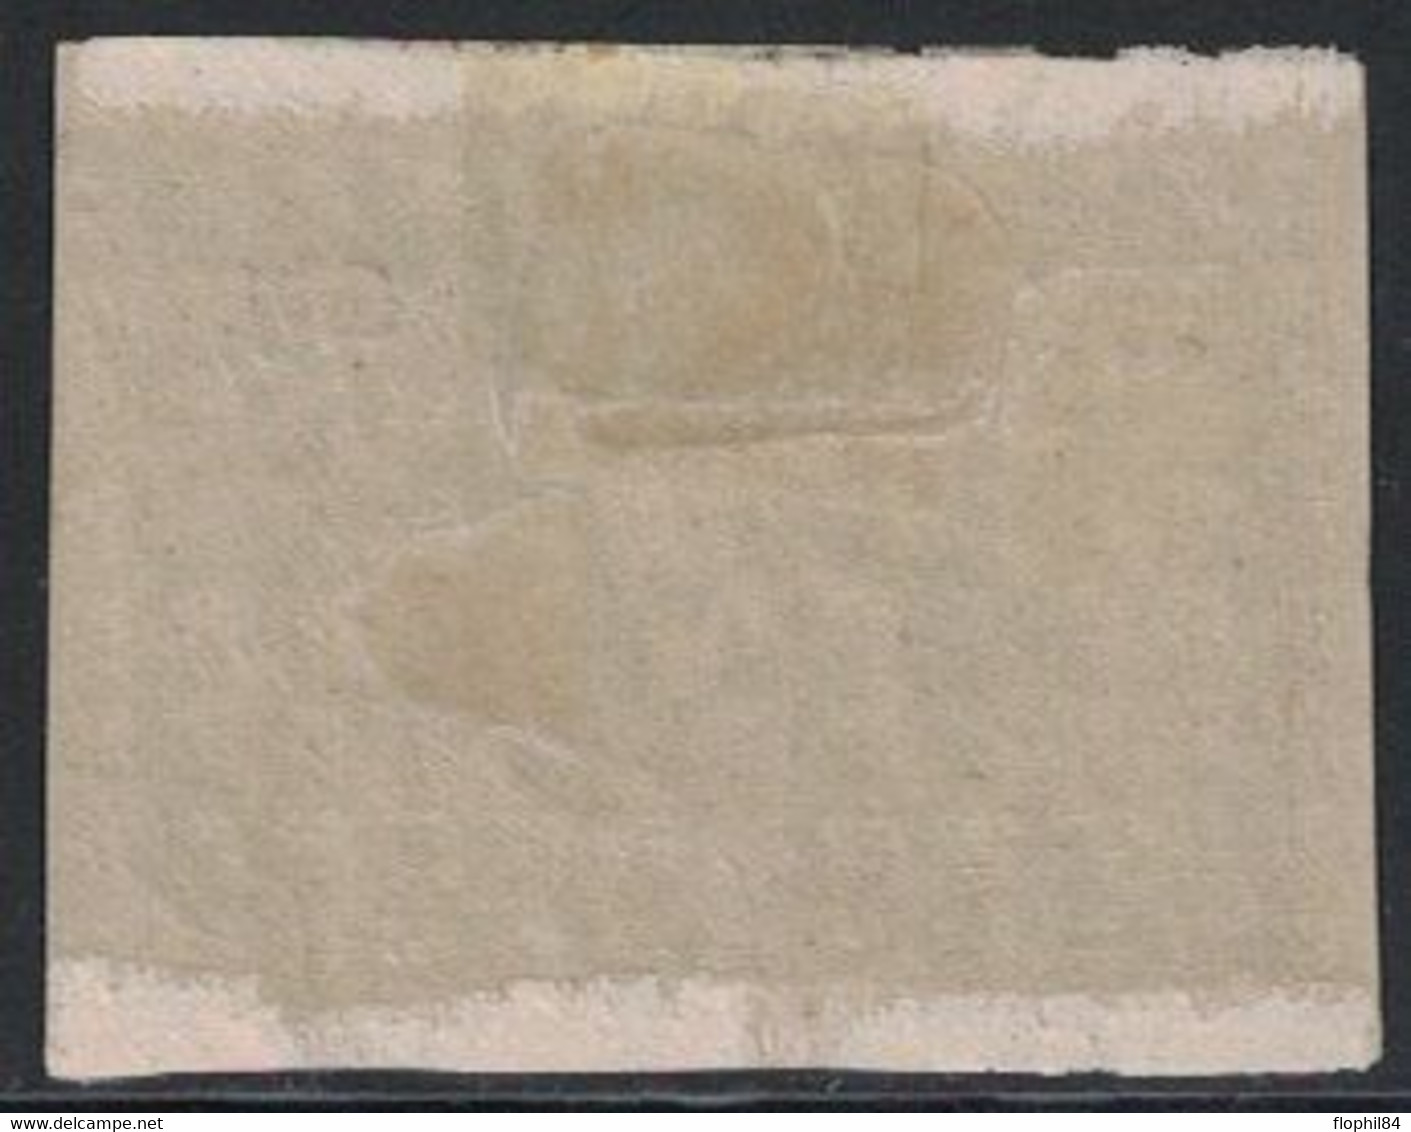 OBOCK - N°59 - NEUF AVEC TRACE DE CHARNIERE  - COTE 20€. - Used Stamps